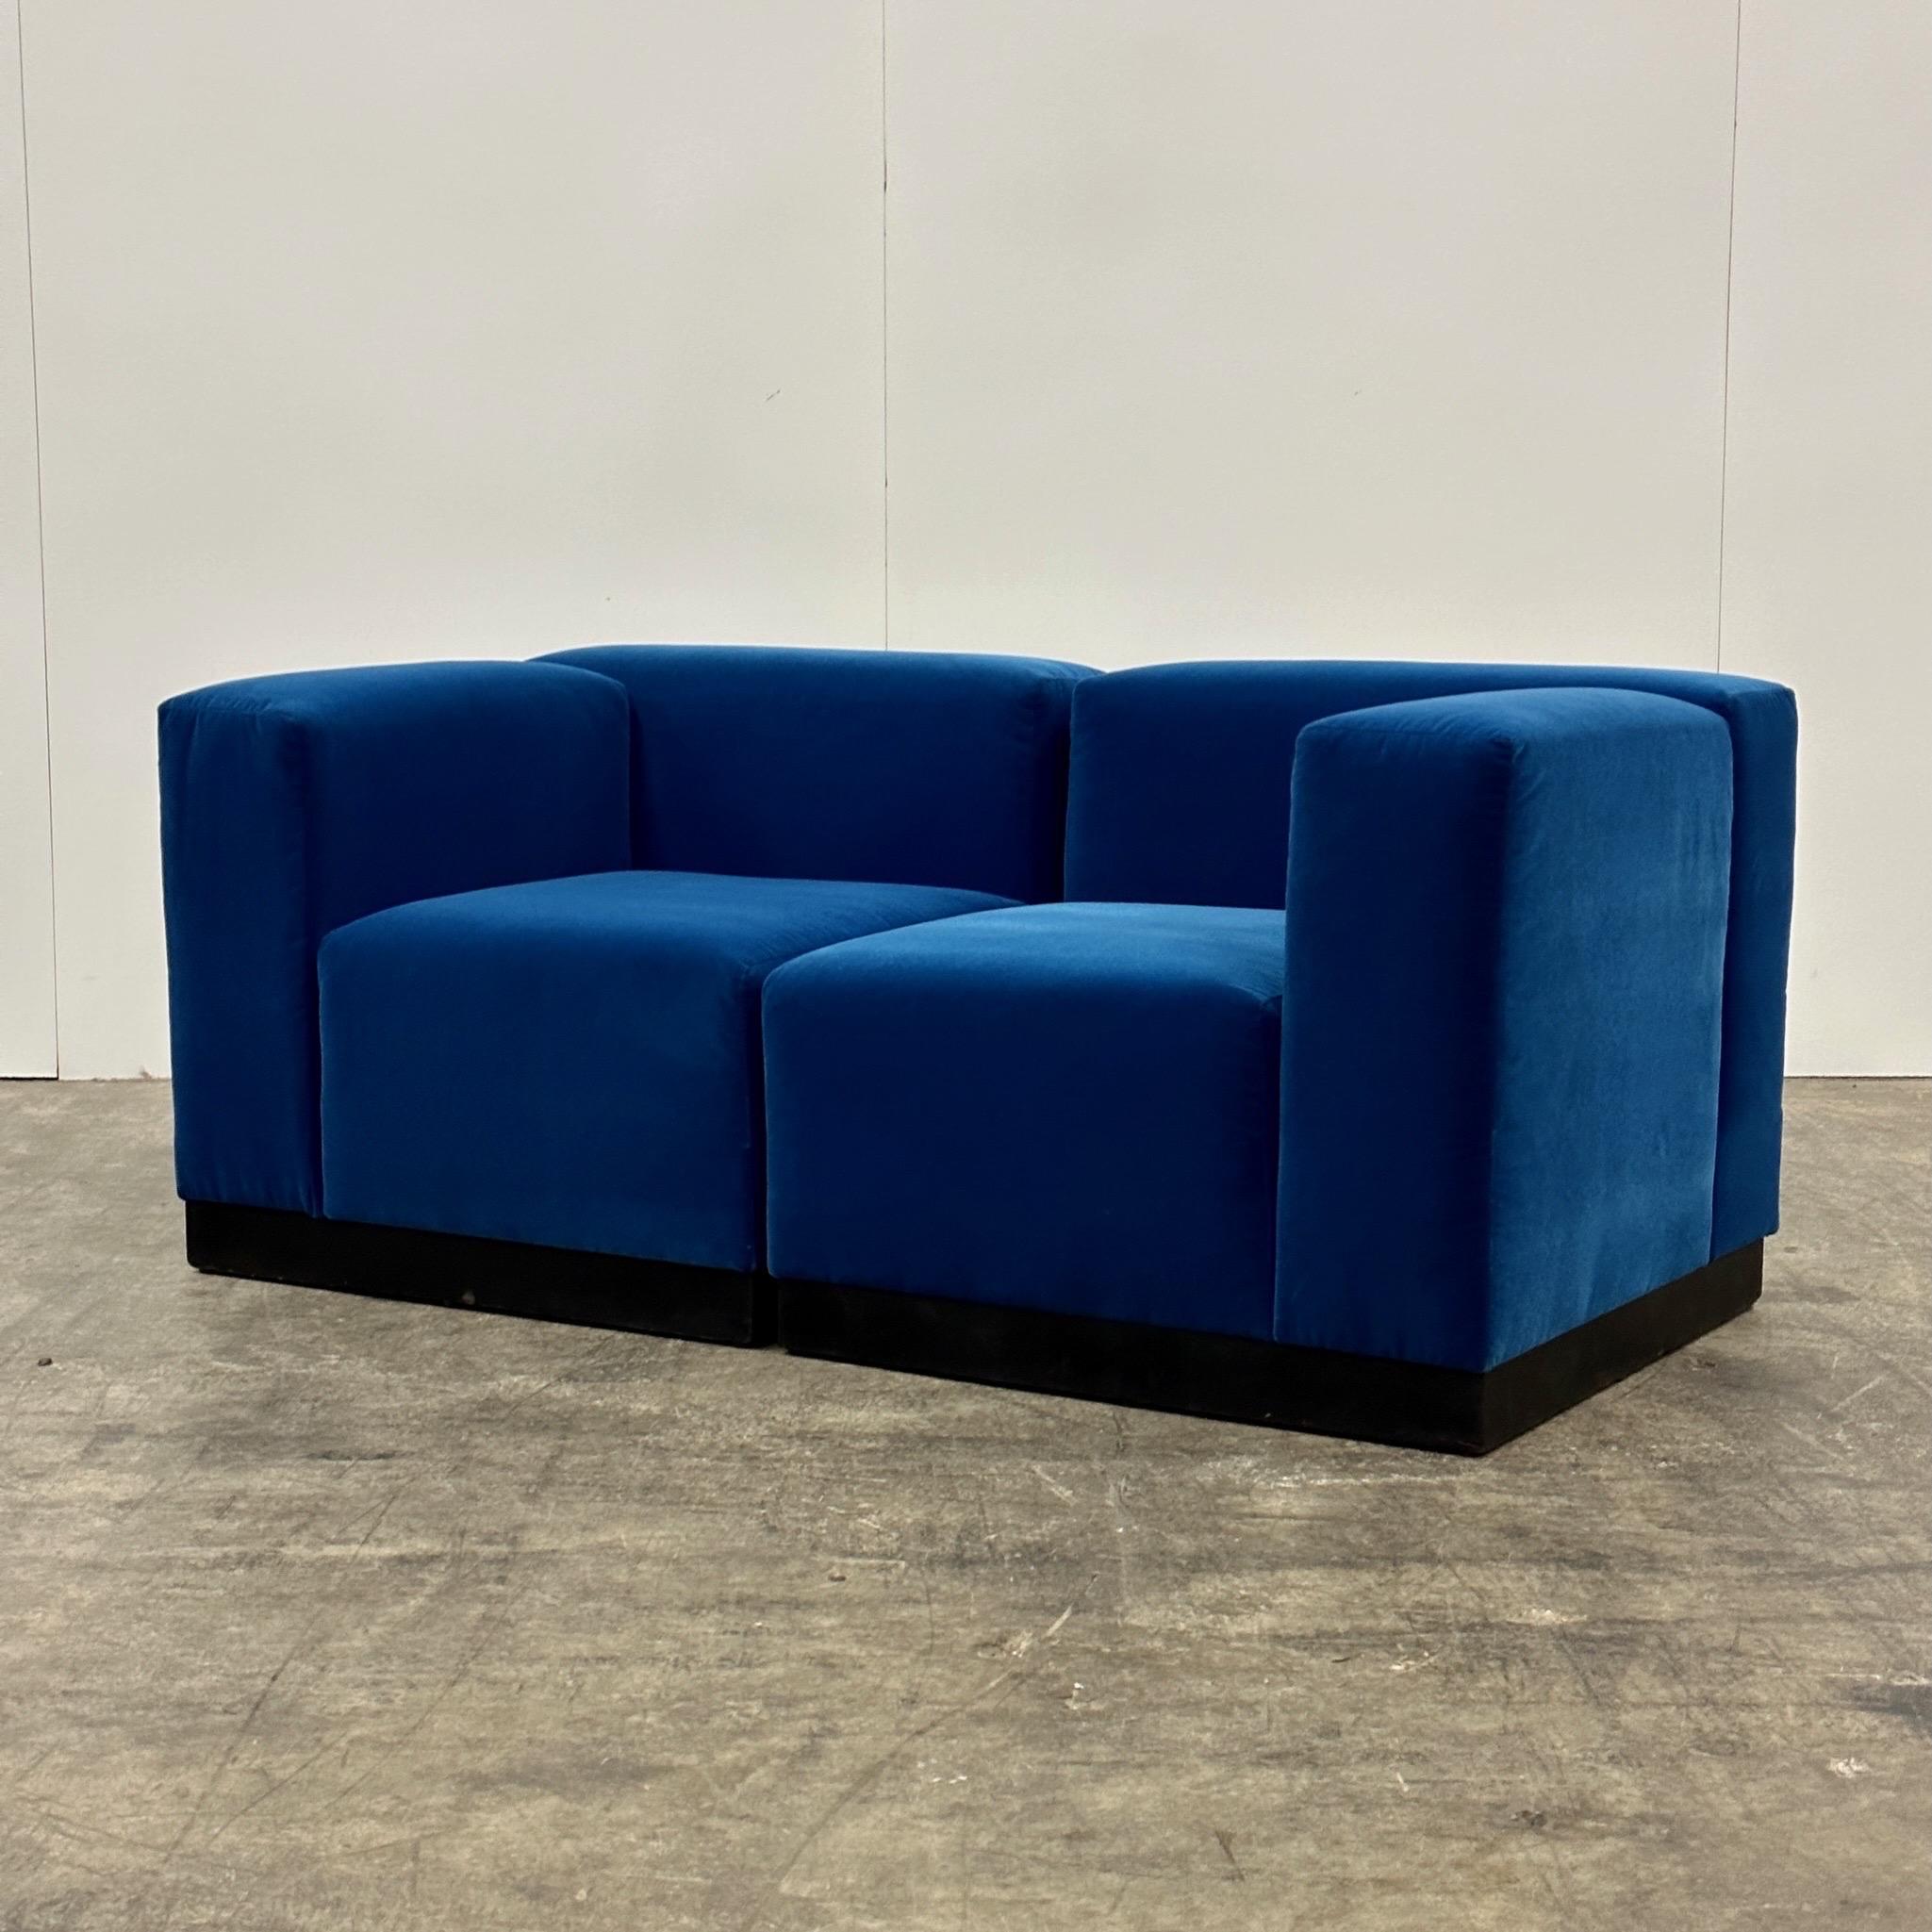 c. 1980s. Price is for the set. Contact us if you’d like to purchase a single item. Made in Chicago by Marden. Reupholstered in premium navy mohair.